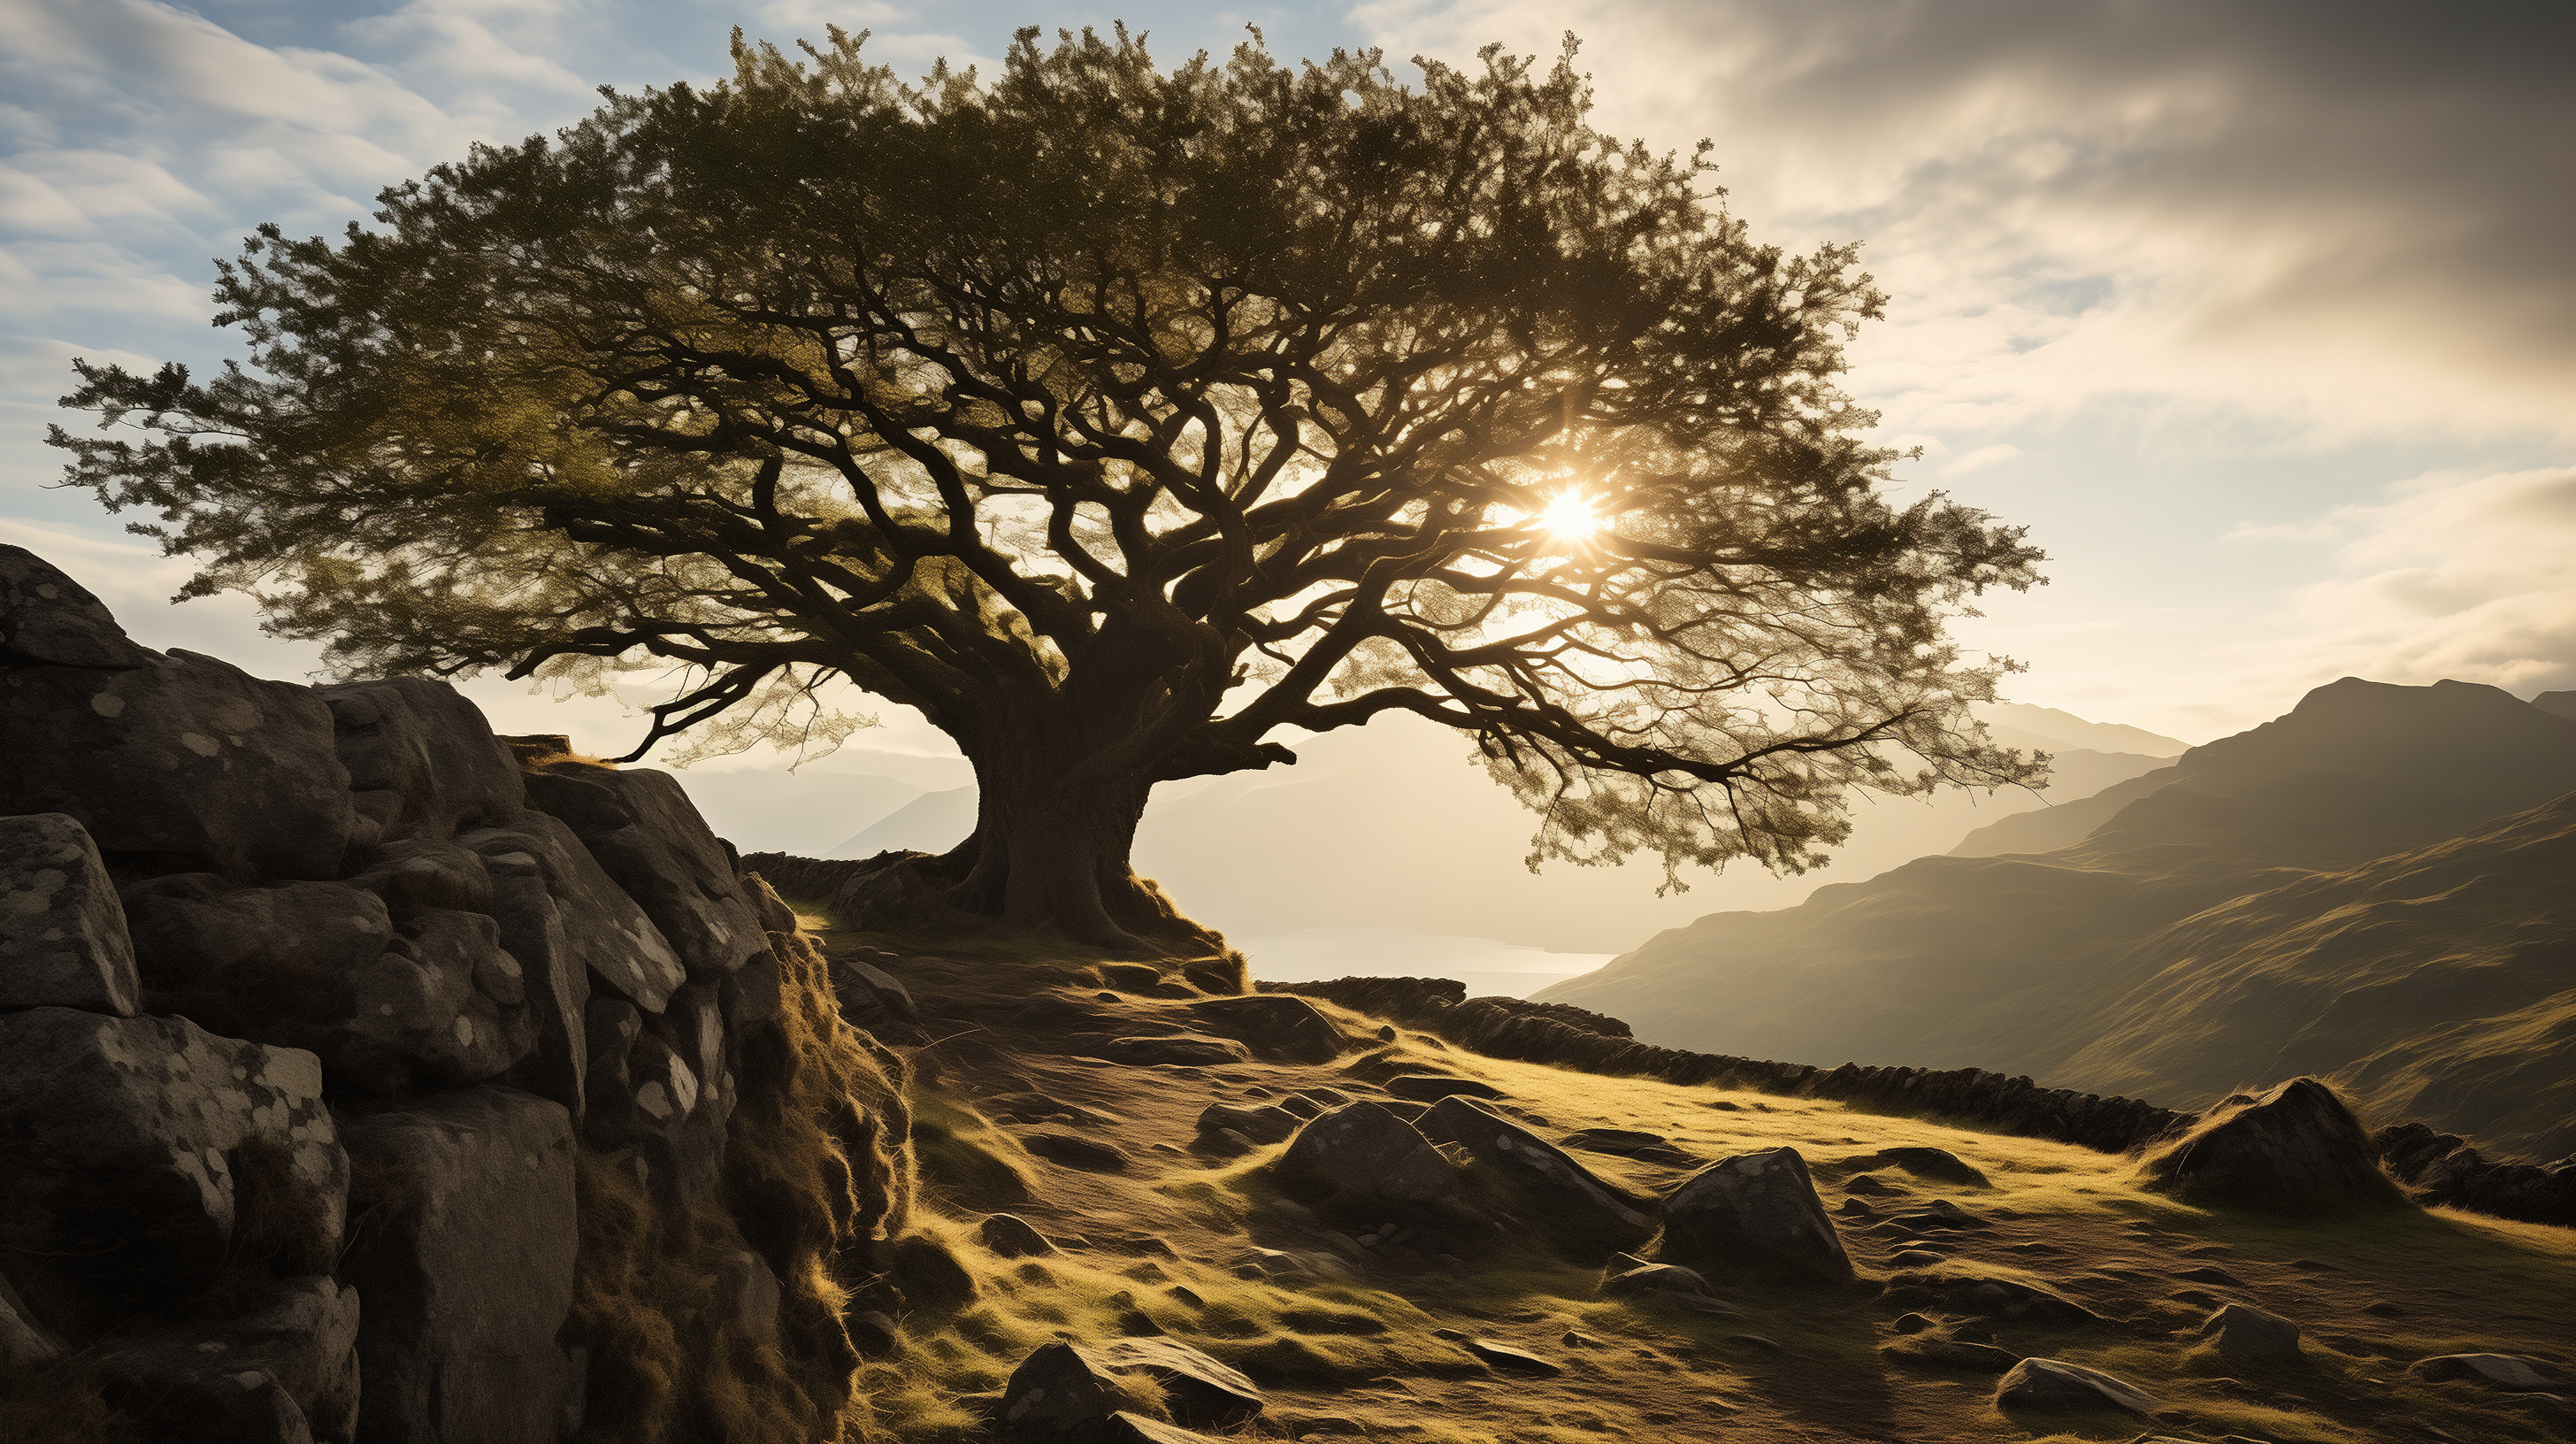 Majestic tree symbolizing Yggdrasil with golden sunset light in a serene HD landscape, ideal for desktop wallpaper and background.